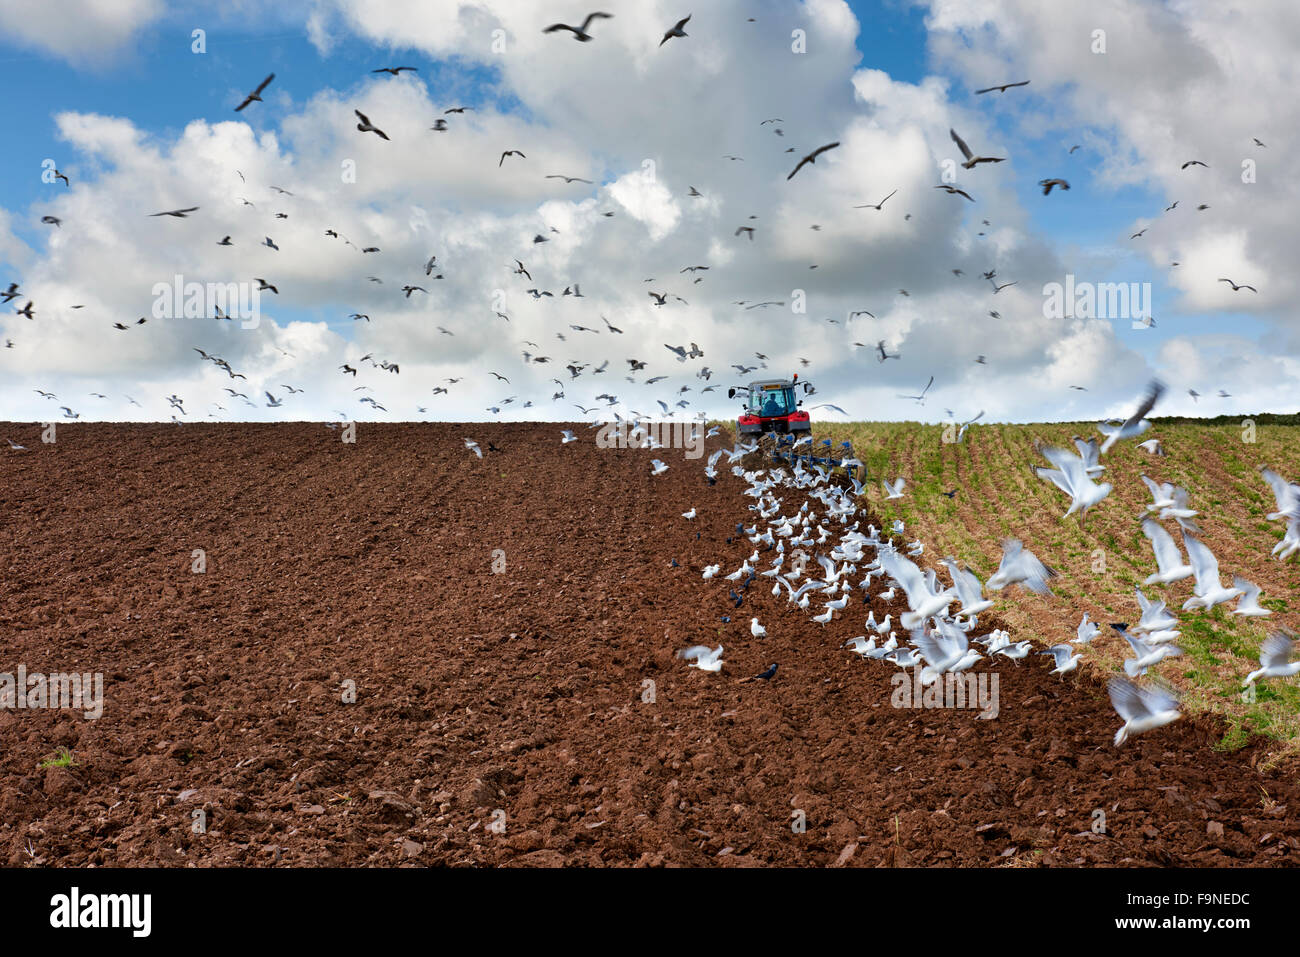 Ploughing the fields with seagulls following and feeding amongst the newly unearthed soil. Stock Photo